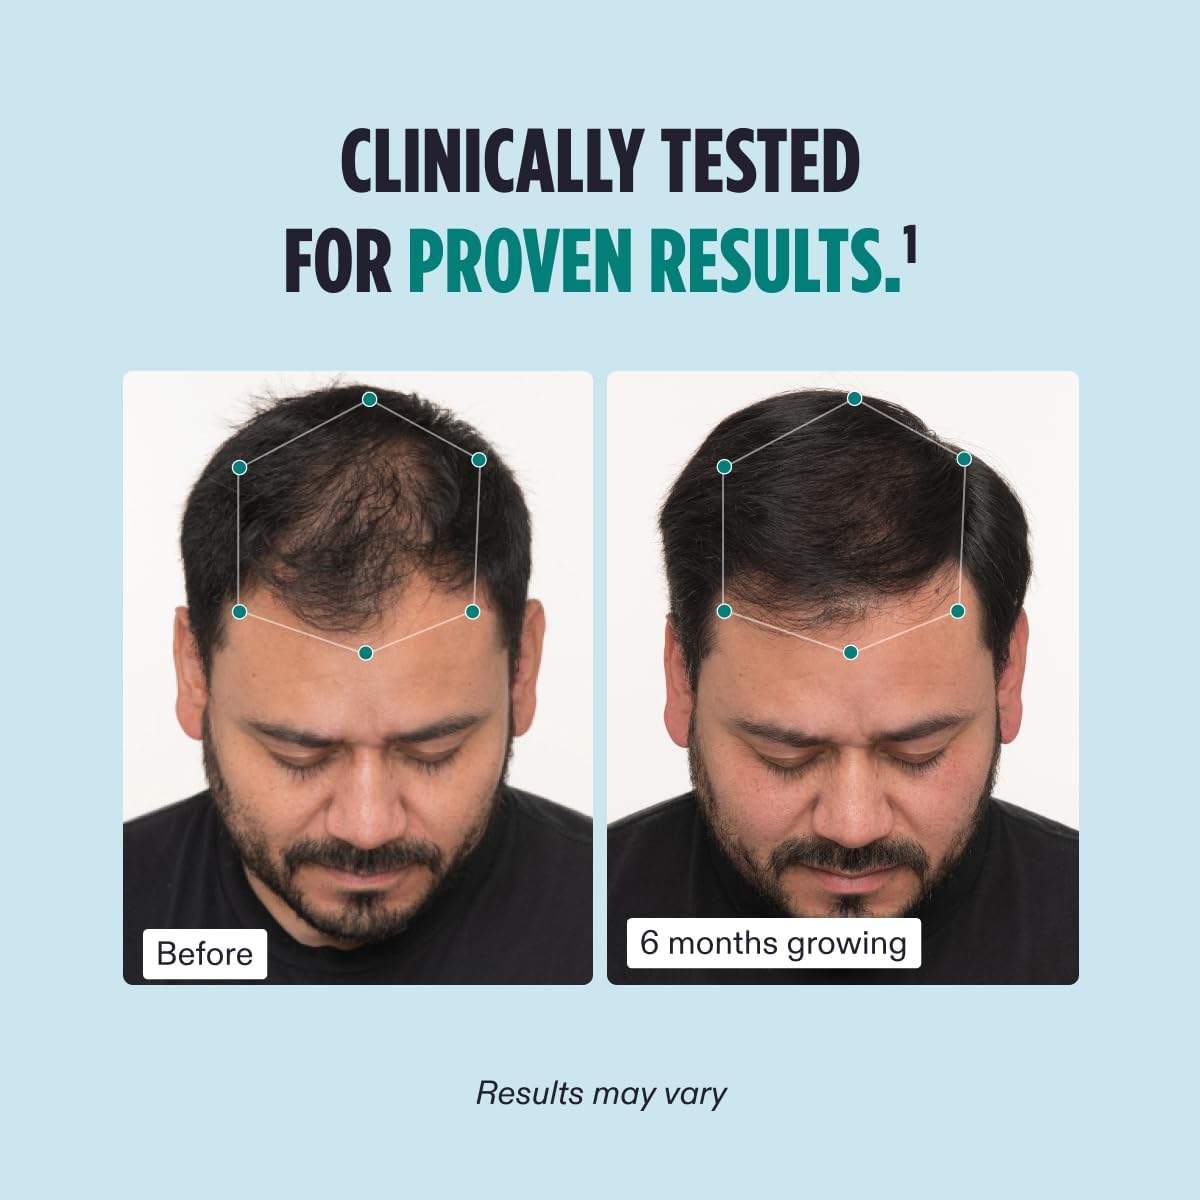 Nutrafol Mens Hair Growth Supplements, Clinically Tested for Visibly Thicker Hair and Scalp Coverage, Dermatologist Recommended - 1 Month Supply